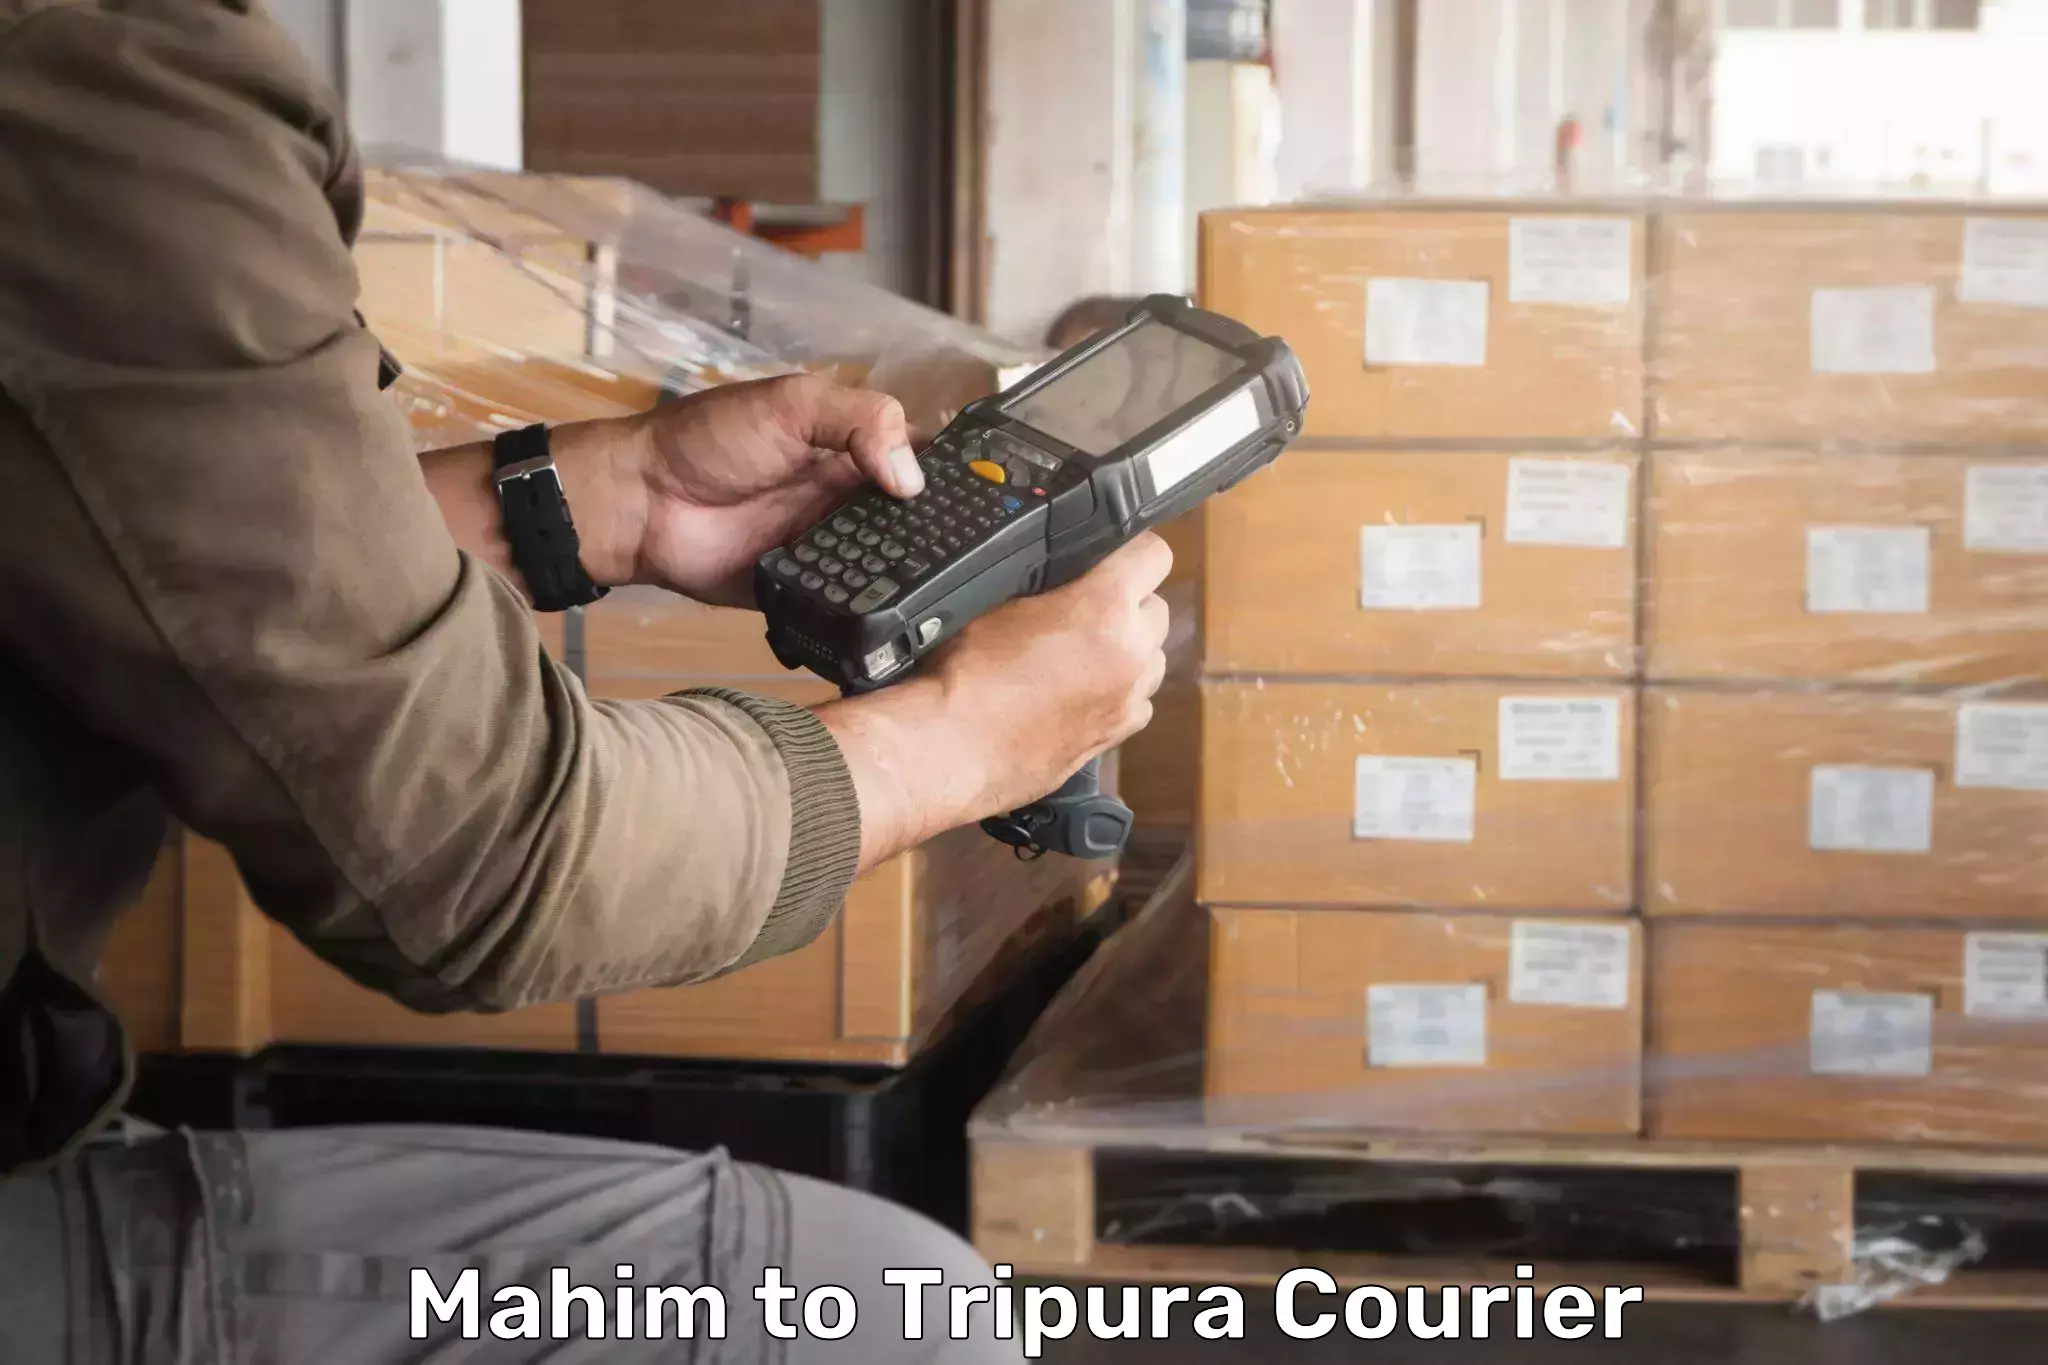 Secure package delivery Mahim to Udaipur Tripura